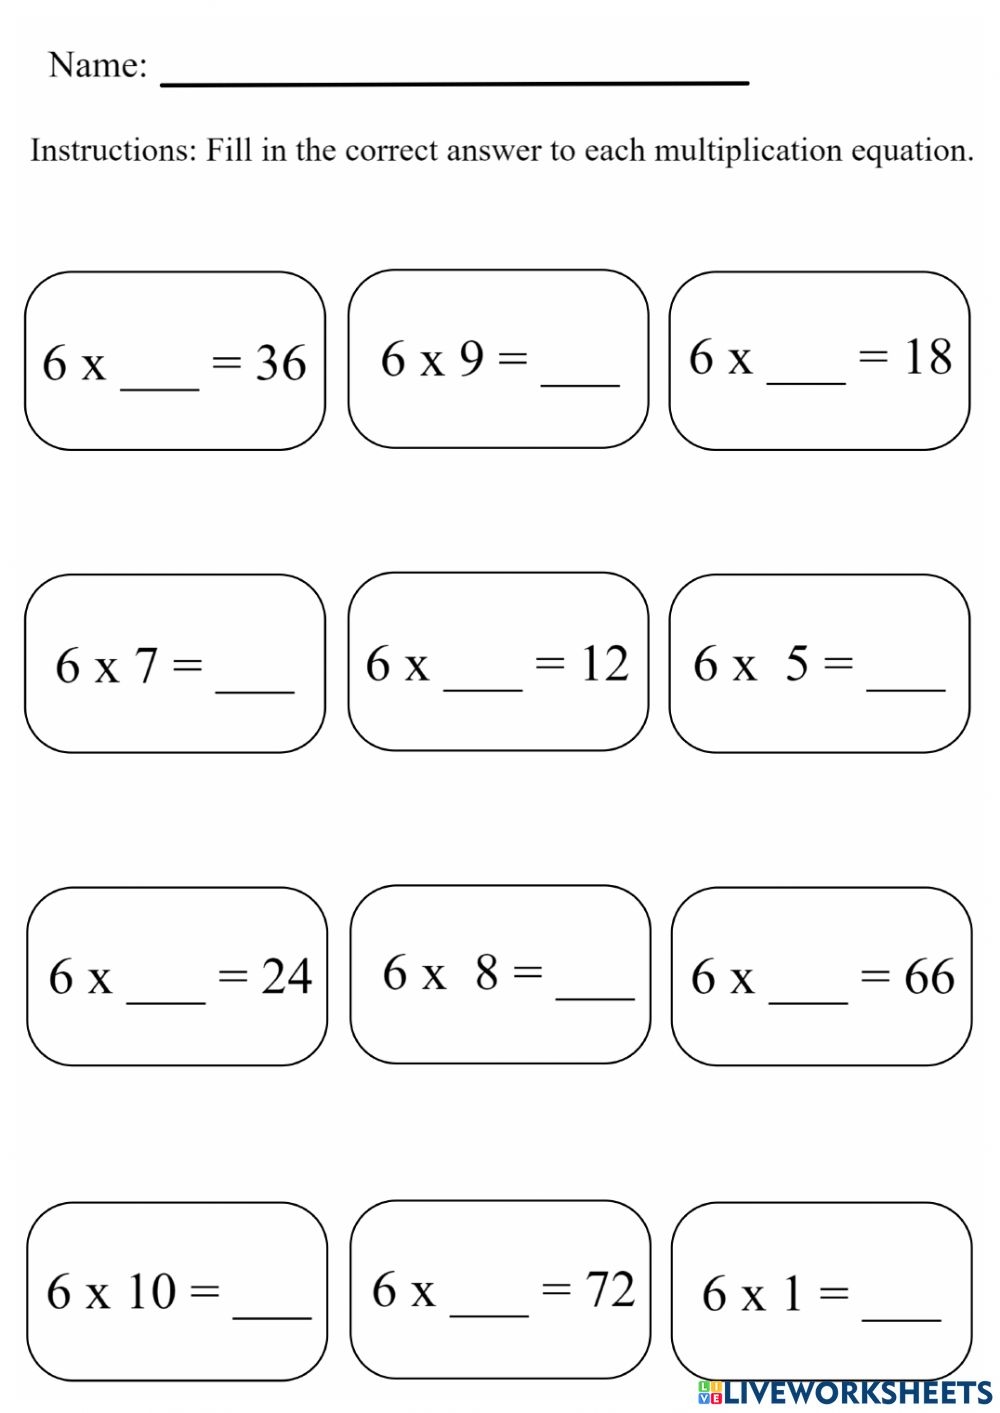 6 Times Table Fill In The Blank Worksheet